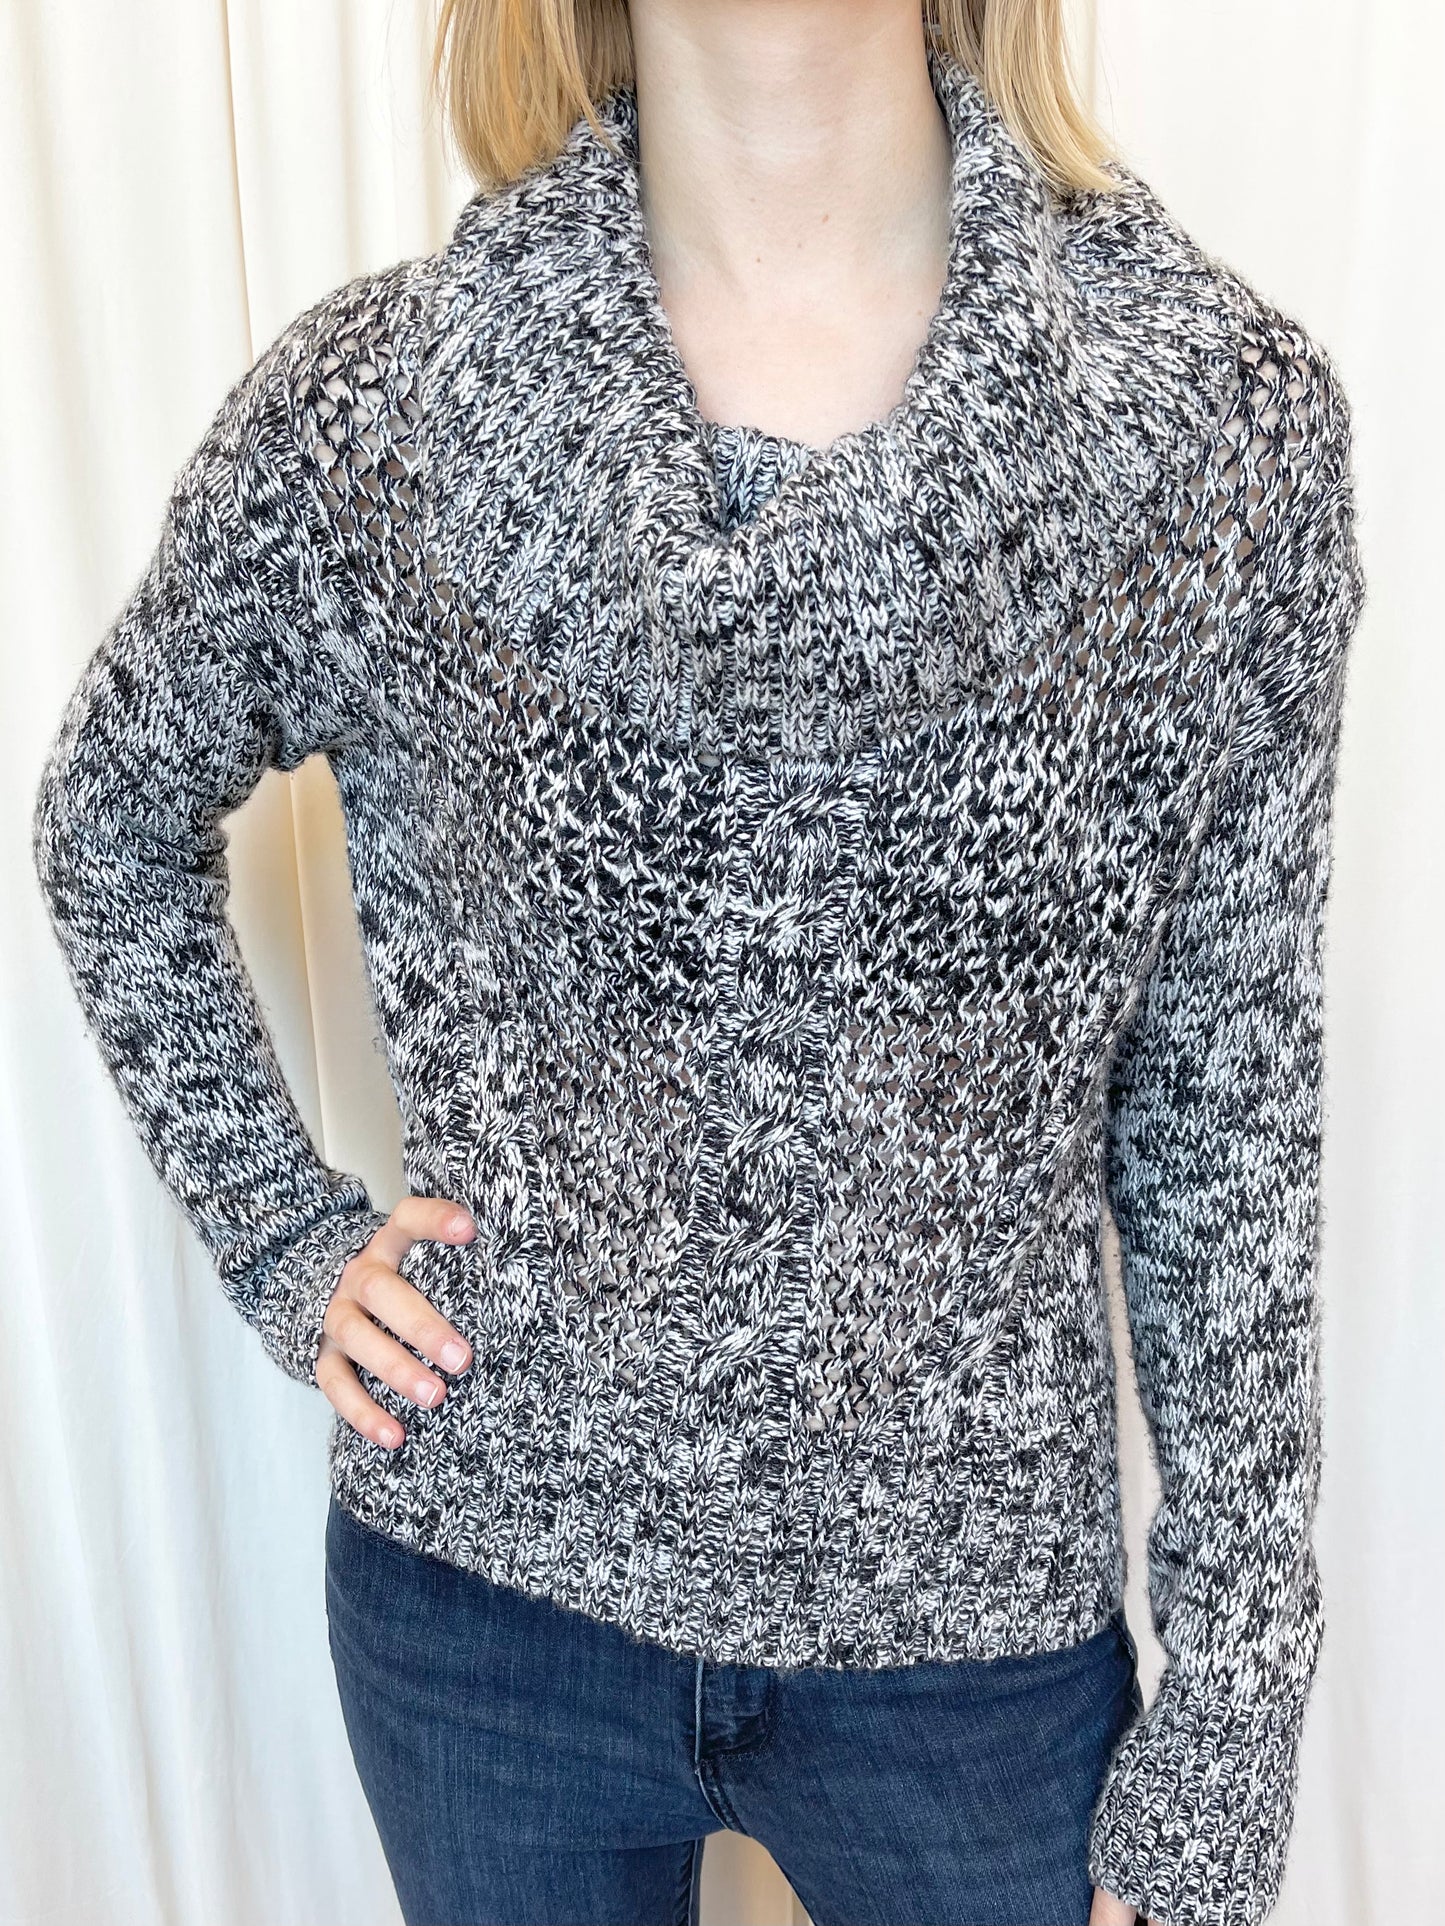 Black Marble Knit Sweater - Small